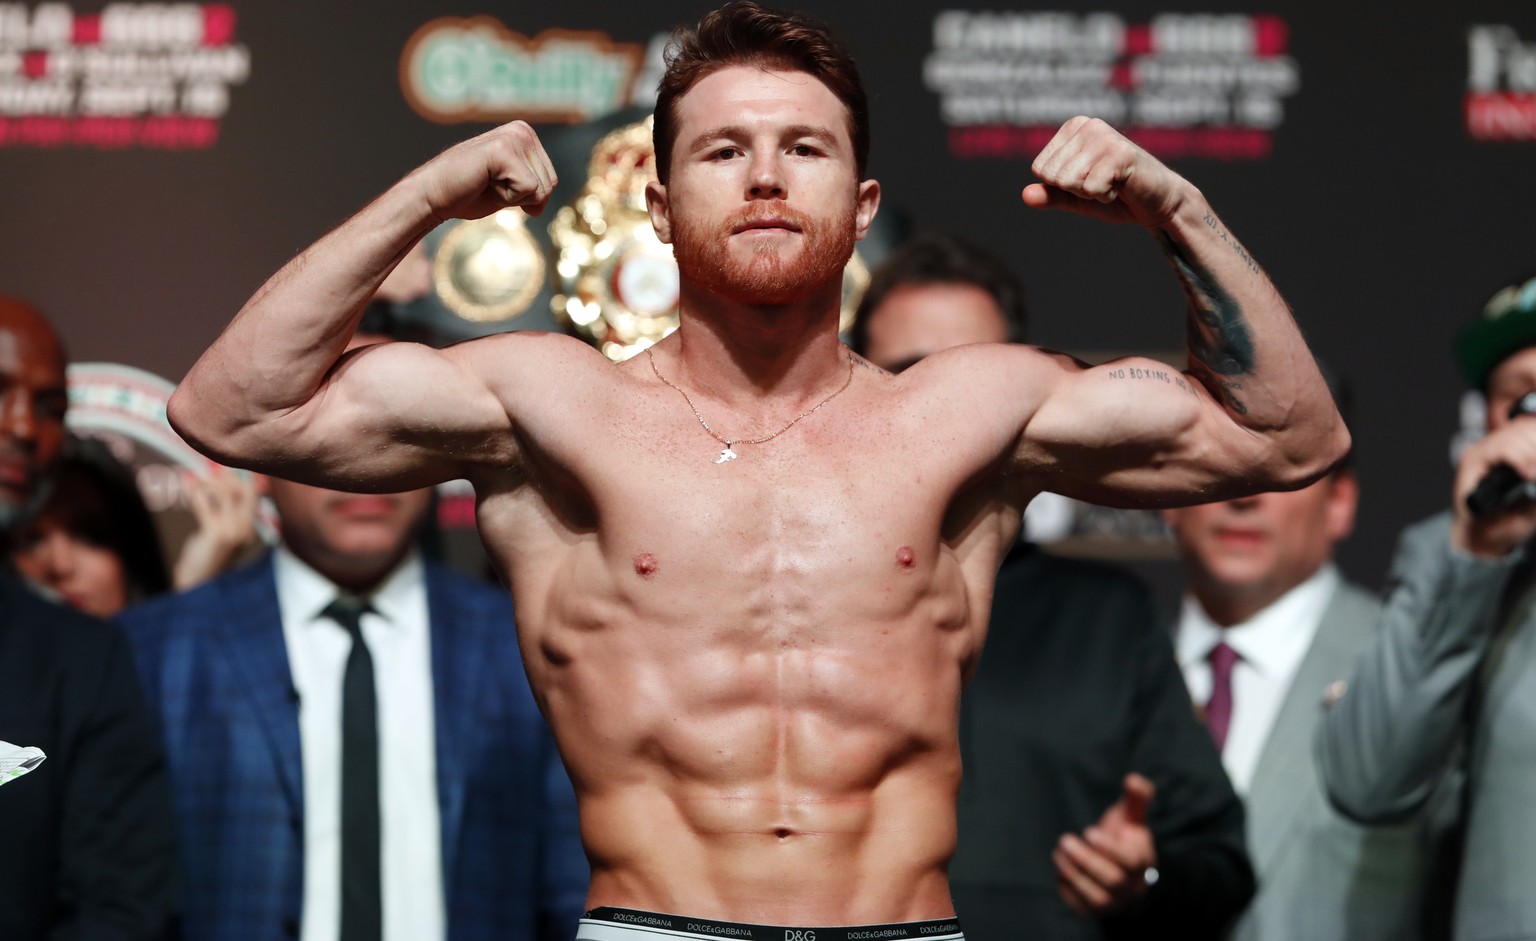 Canelo Alvarez, of Mexico, flexes onstage during an official weigh-in at T-Mobile Arena in Las Vegas Friday, Sept. 14, 2018. Alvarez will challenge WBC/WBA middleweight champion Gennady Golovkin of Ka ...